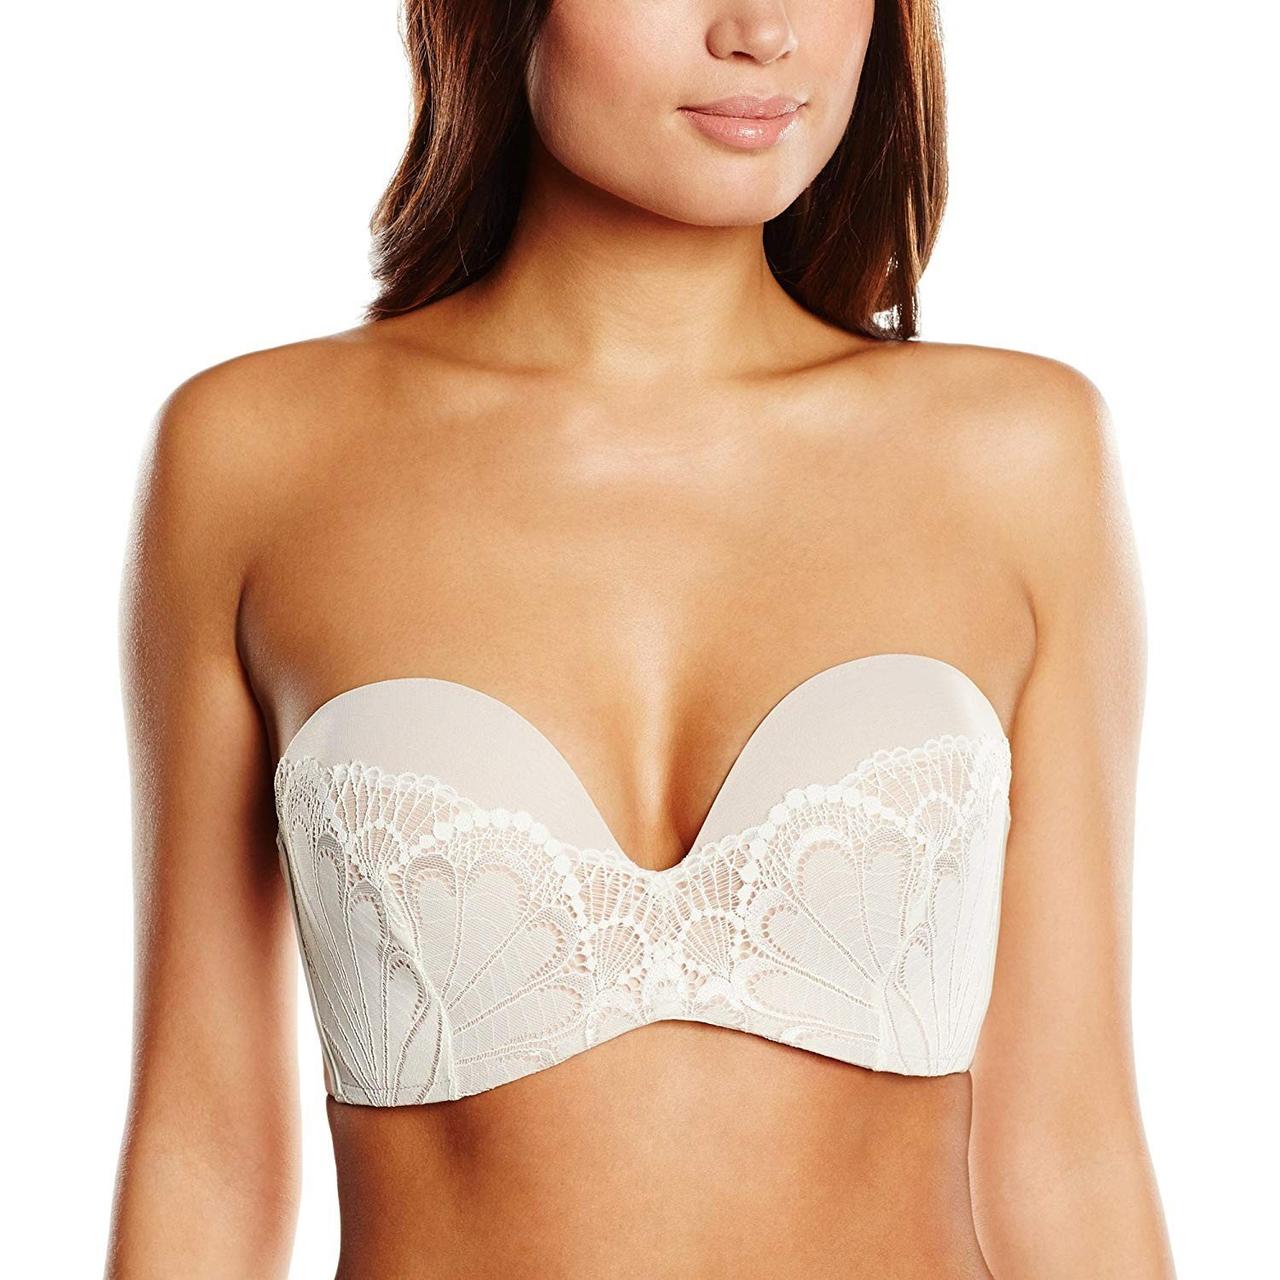 21 of the Best Strapless Bras for 2019 That Won't Slip & Slide - hitched.co. uk 